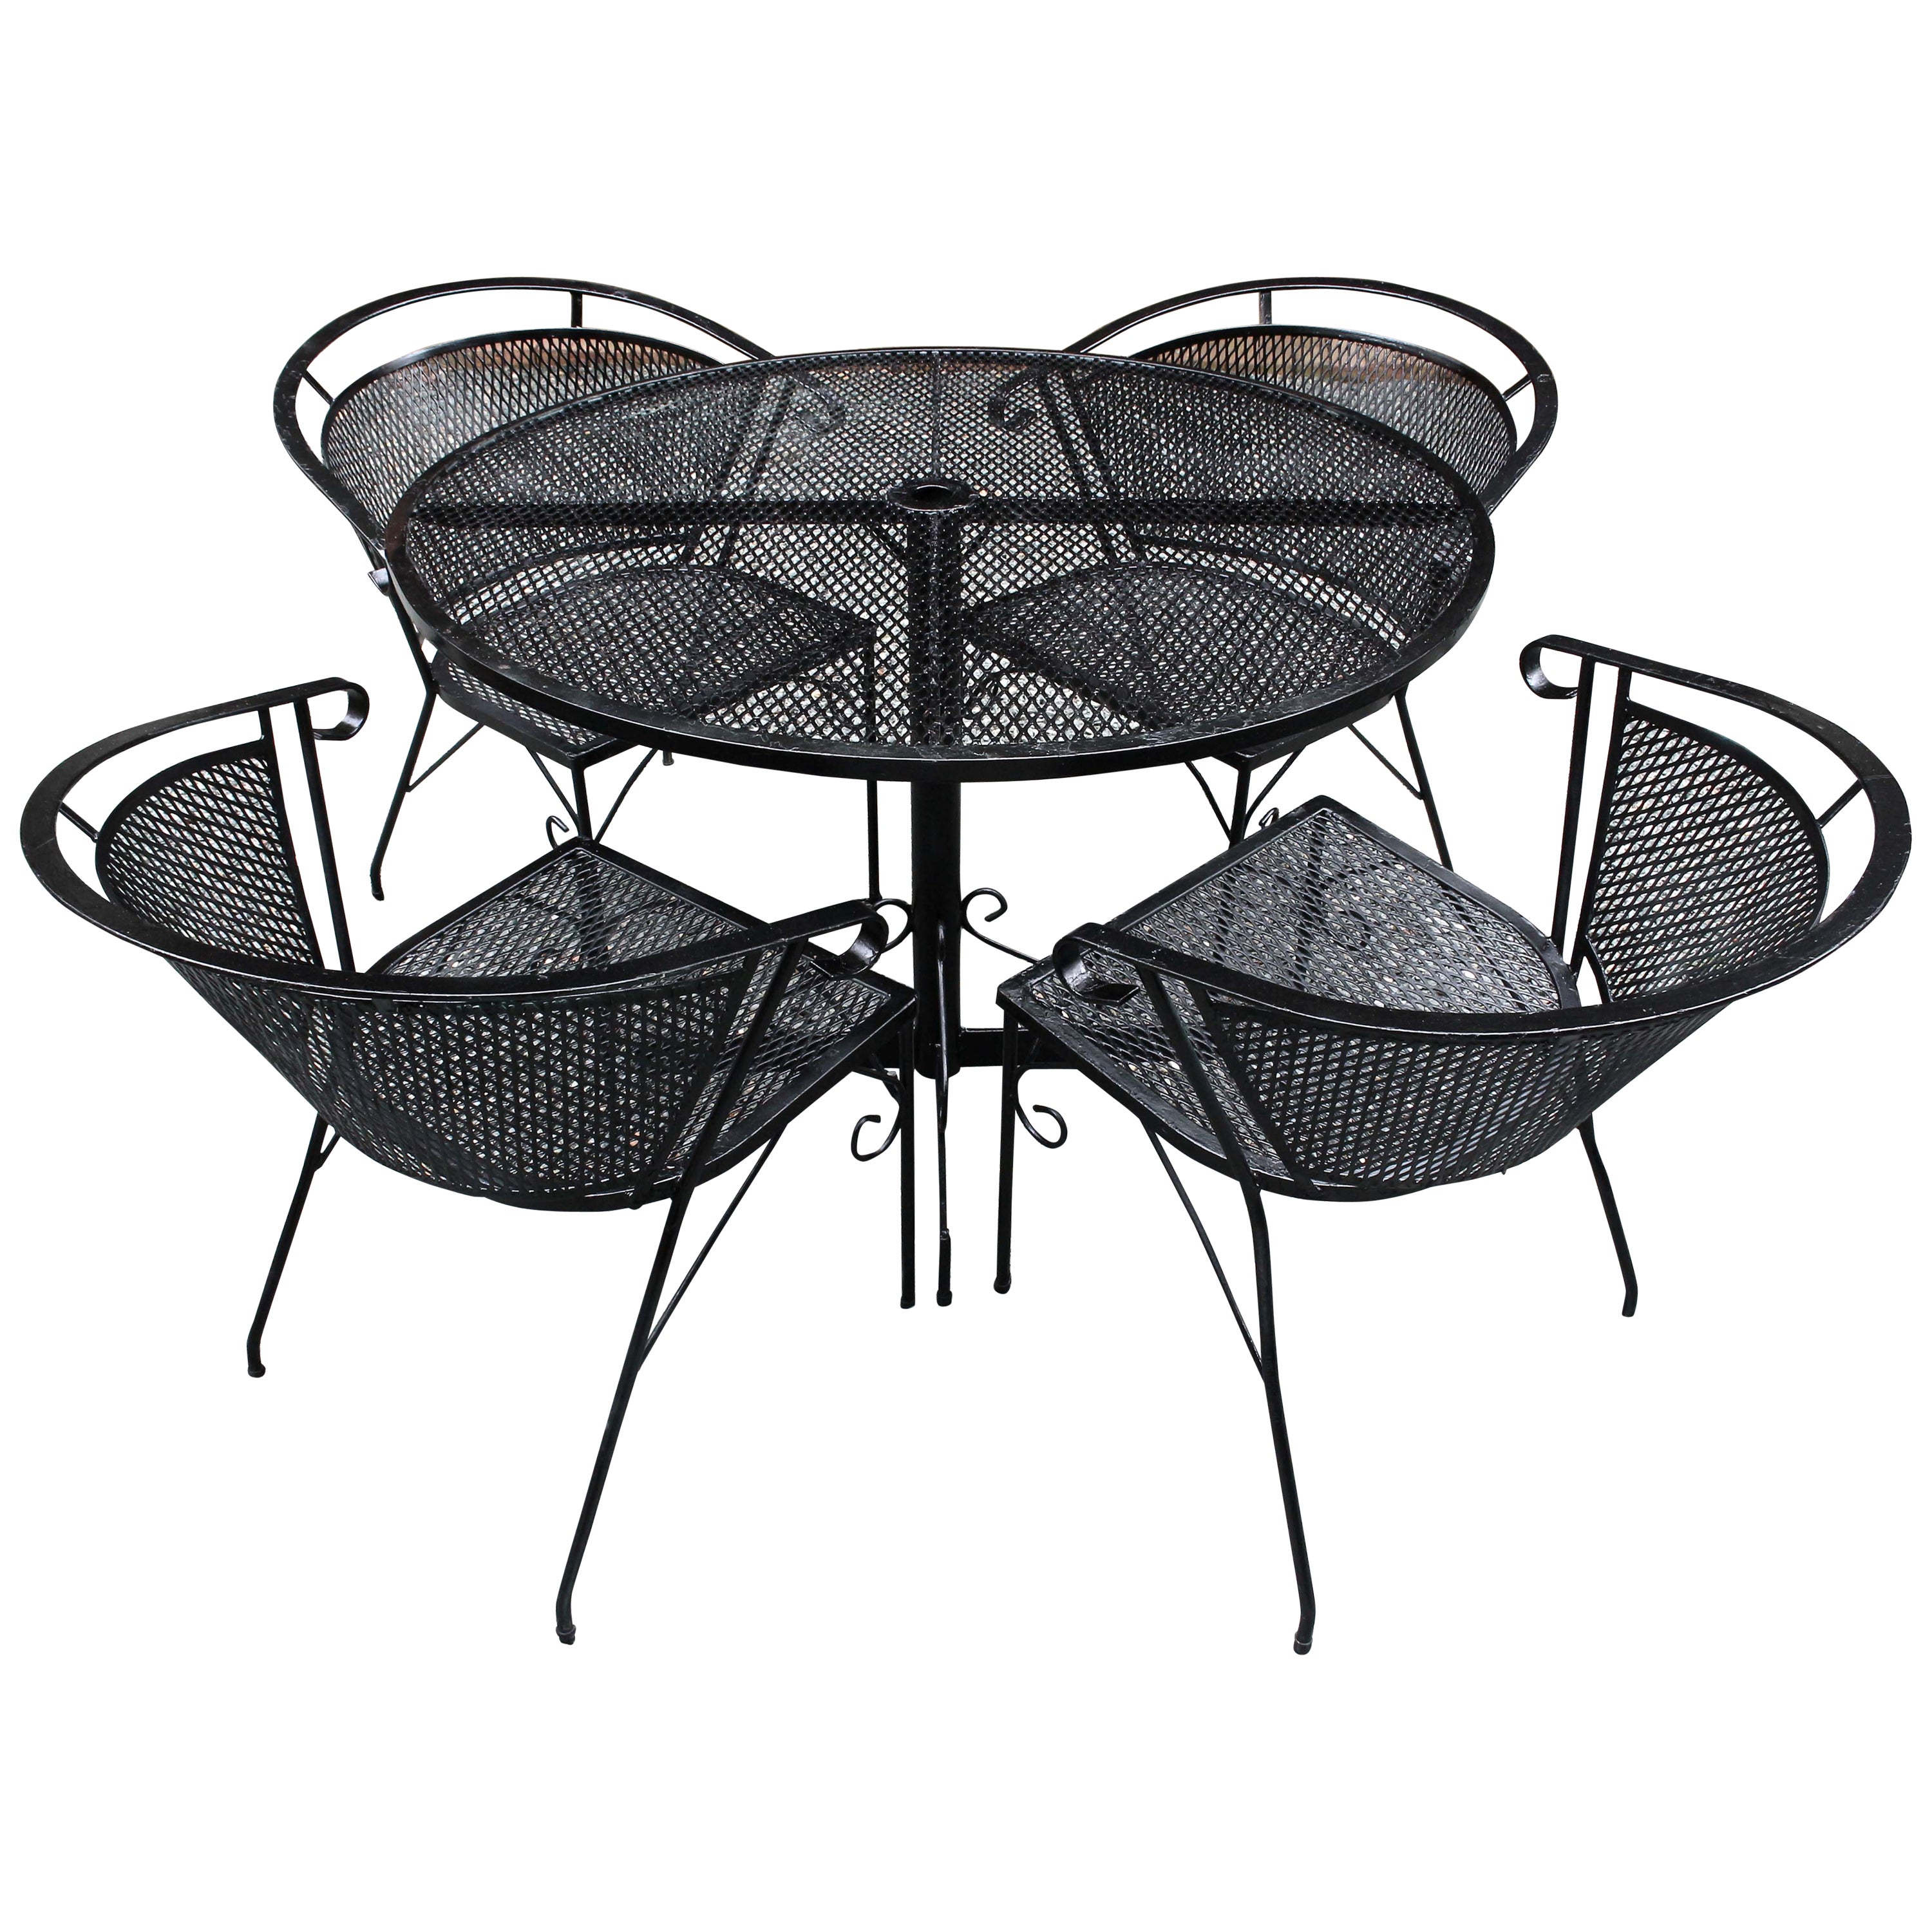 Circa 1950-70 Wrought Iron Outdoor Table & Four Arm Chairs For Sale